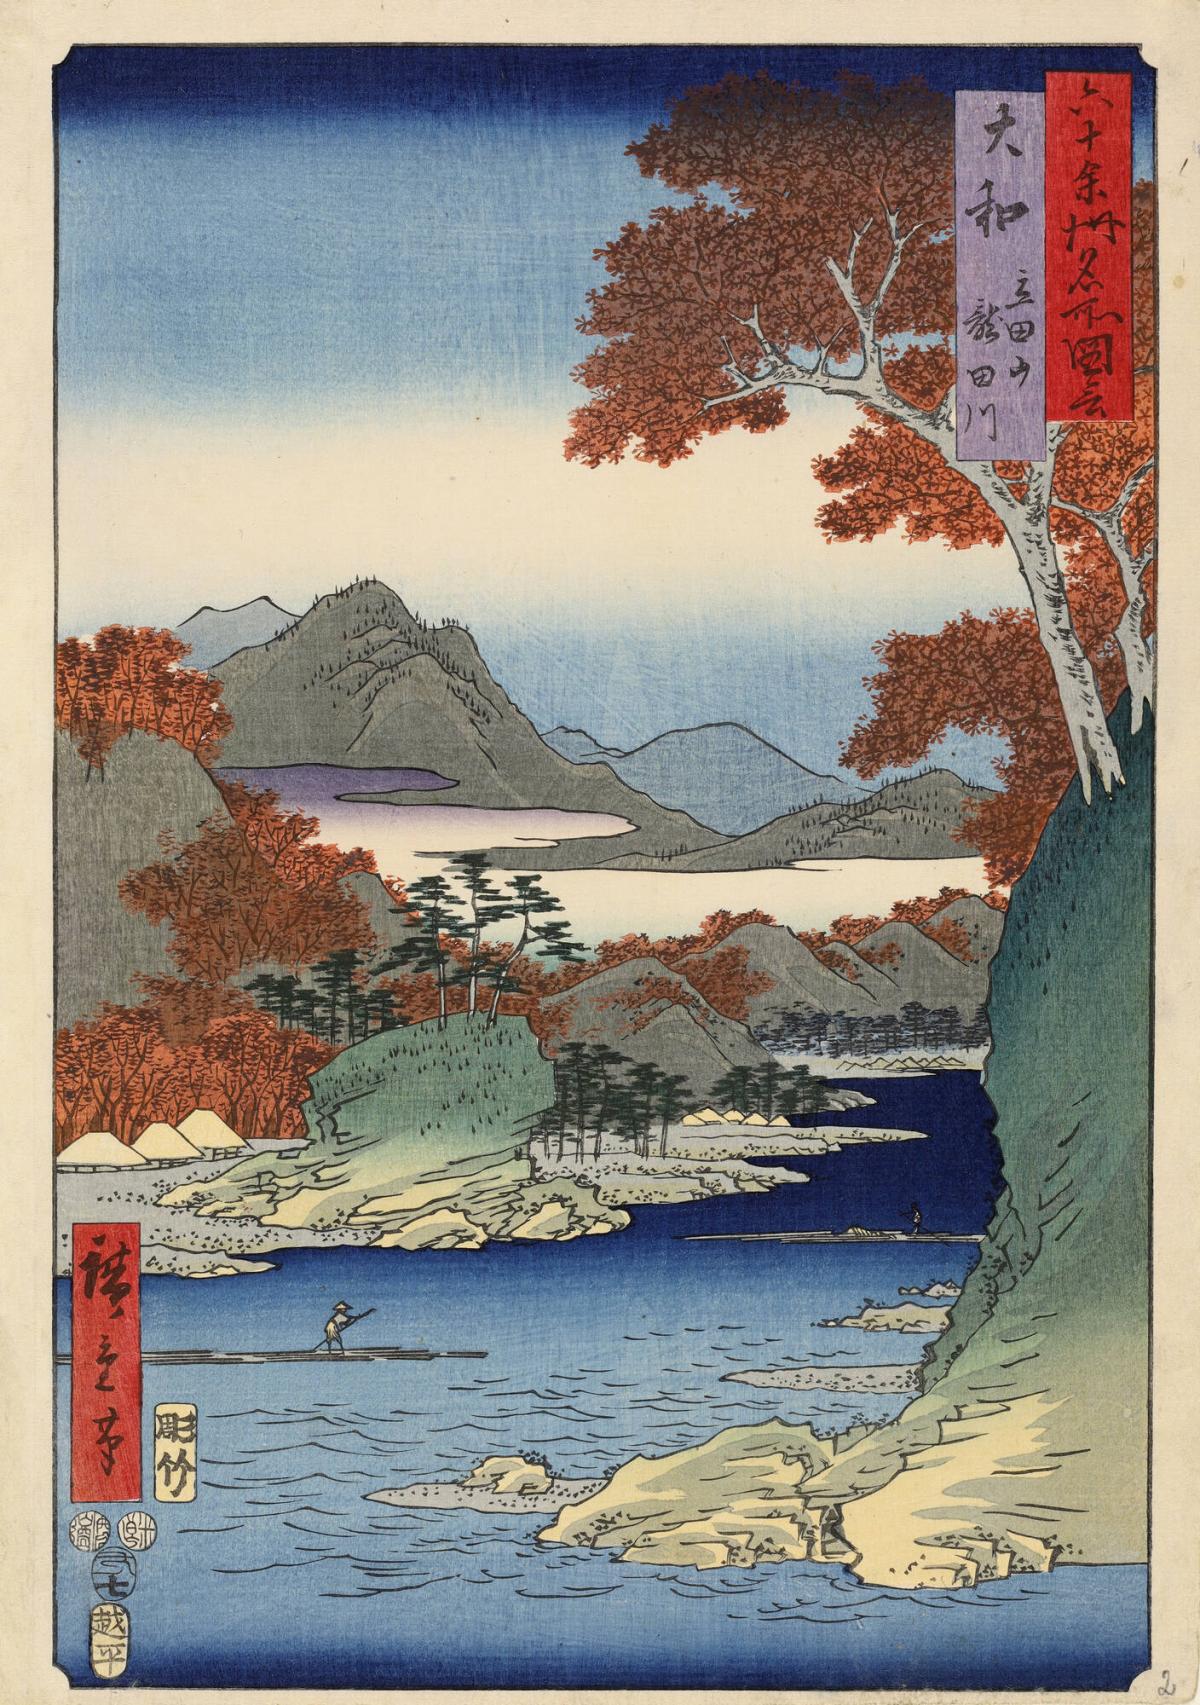 Tatsuta River and Tatsuta Mountain in Yamoto Province, no. 2 from the series Pictures of Famous Places in the Sixty-odd Provinces